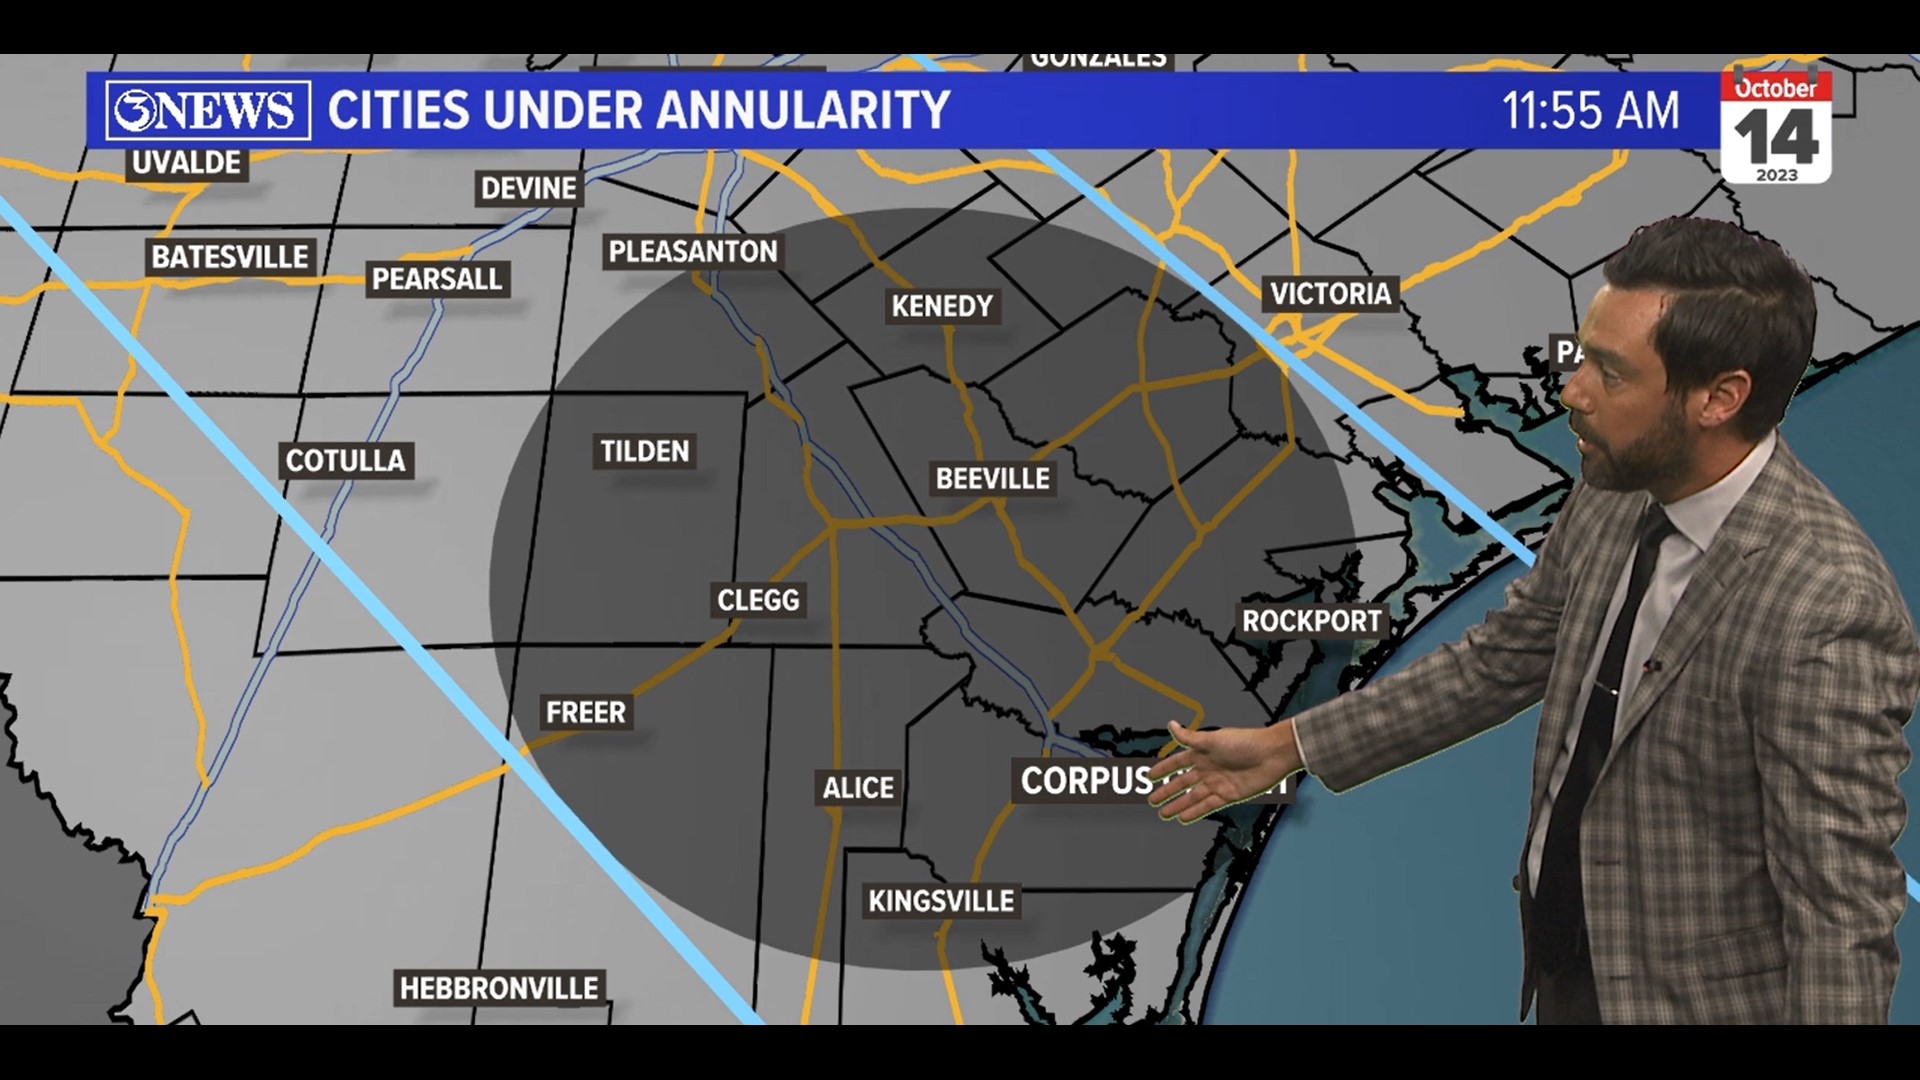 The unusual event will be visible in the Coastal Bend on Oct. 14.